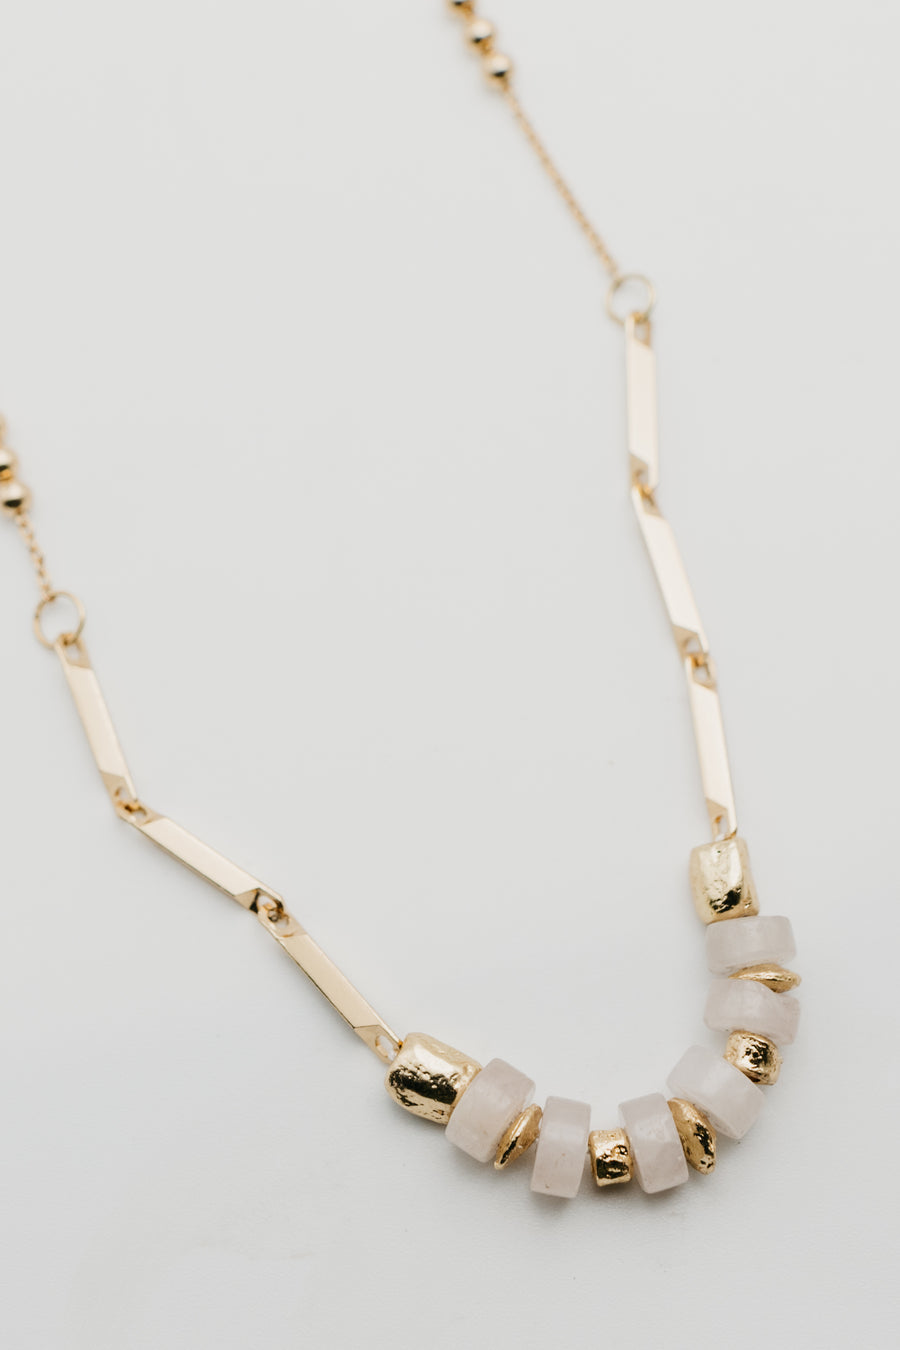 The Margie Stone Necklace